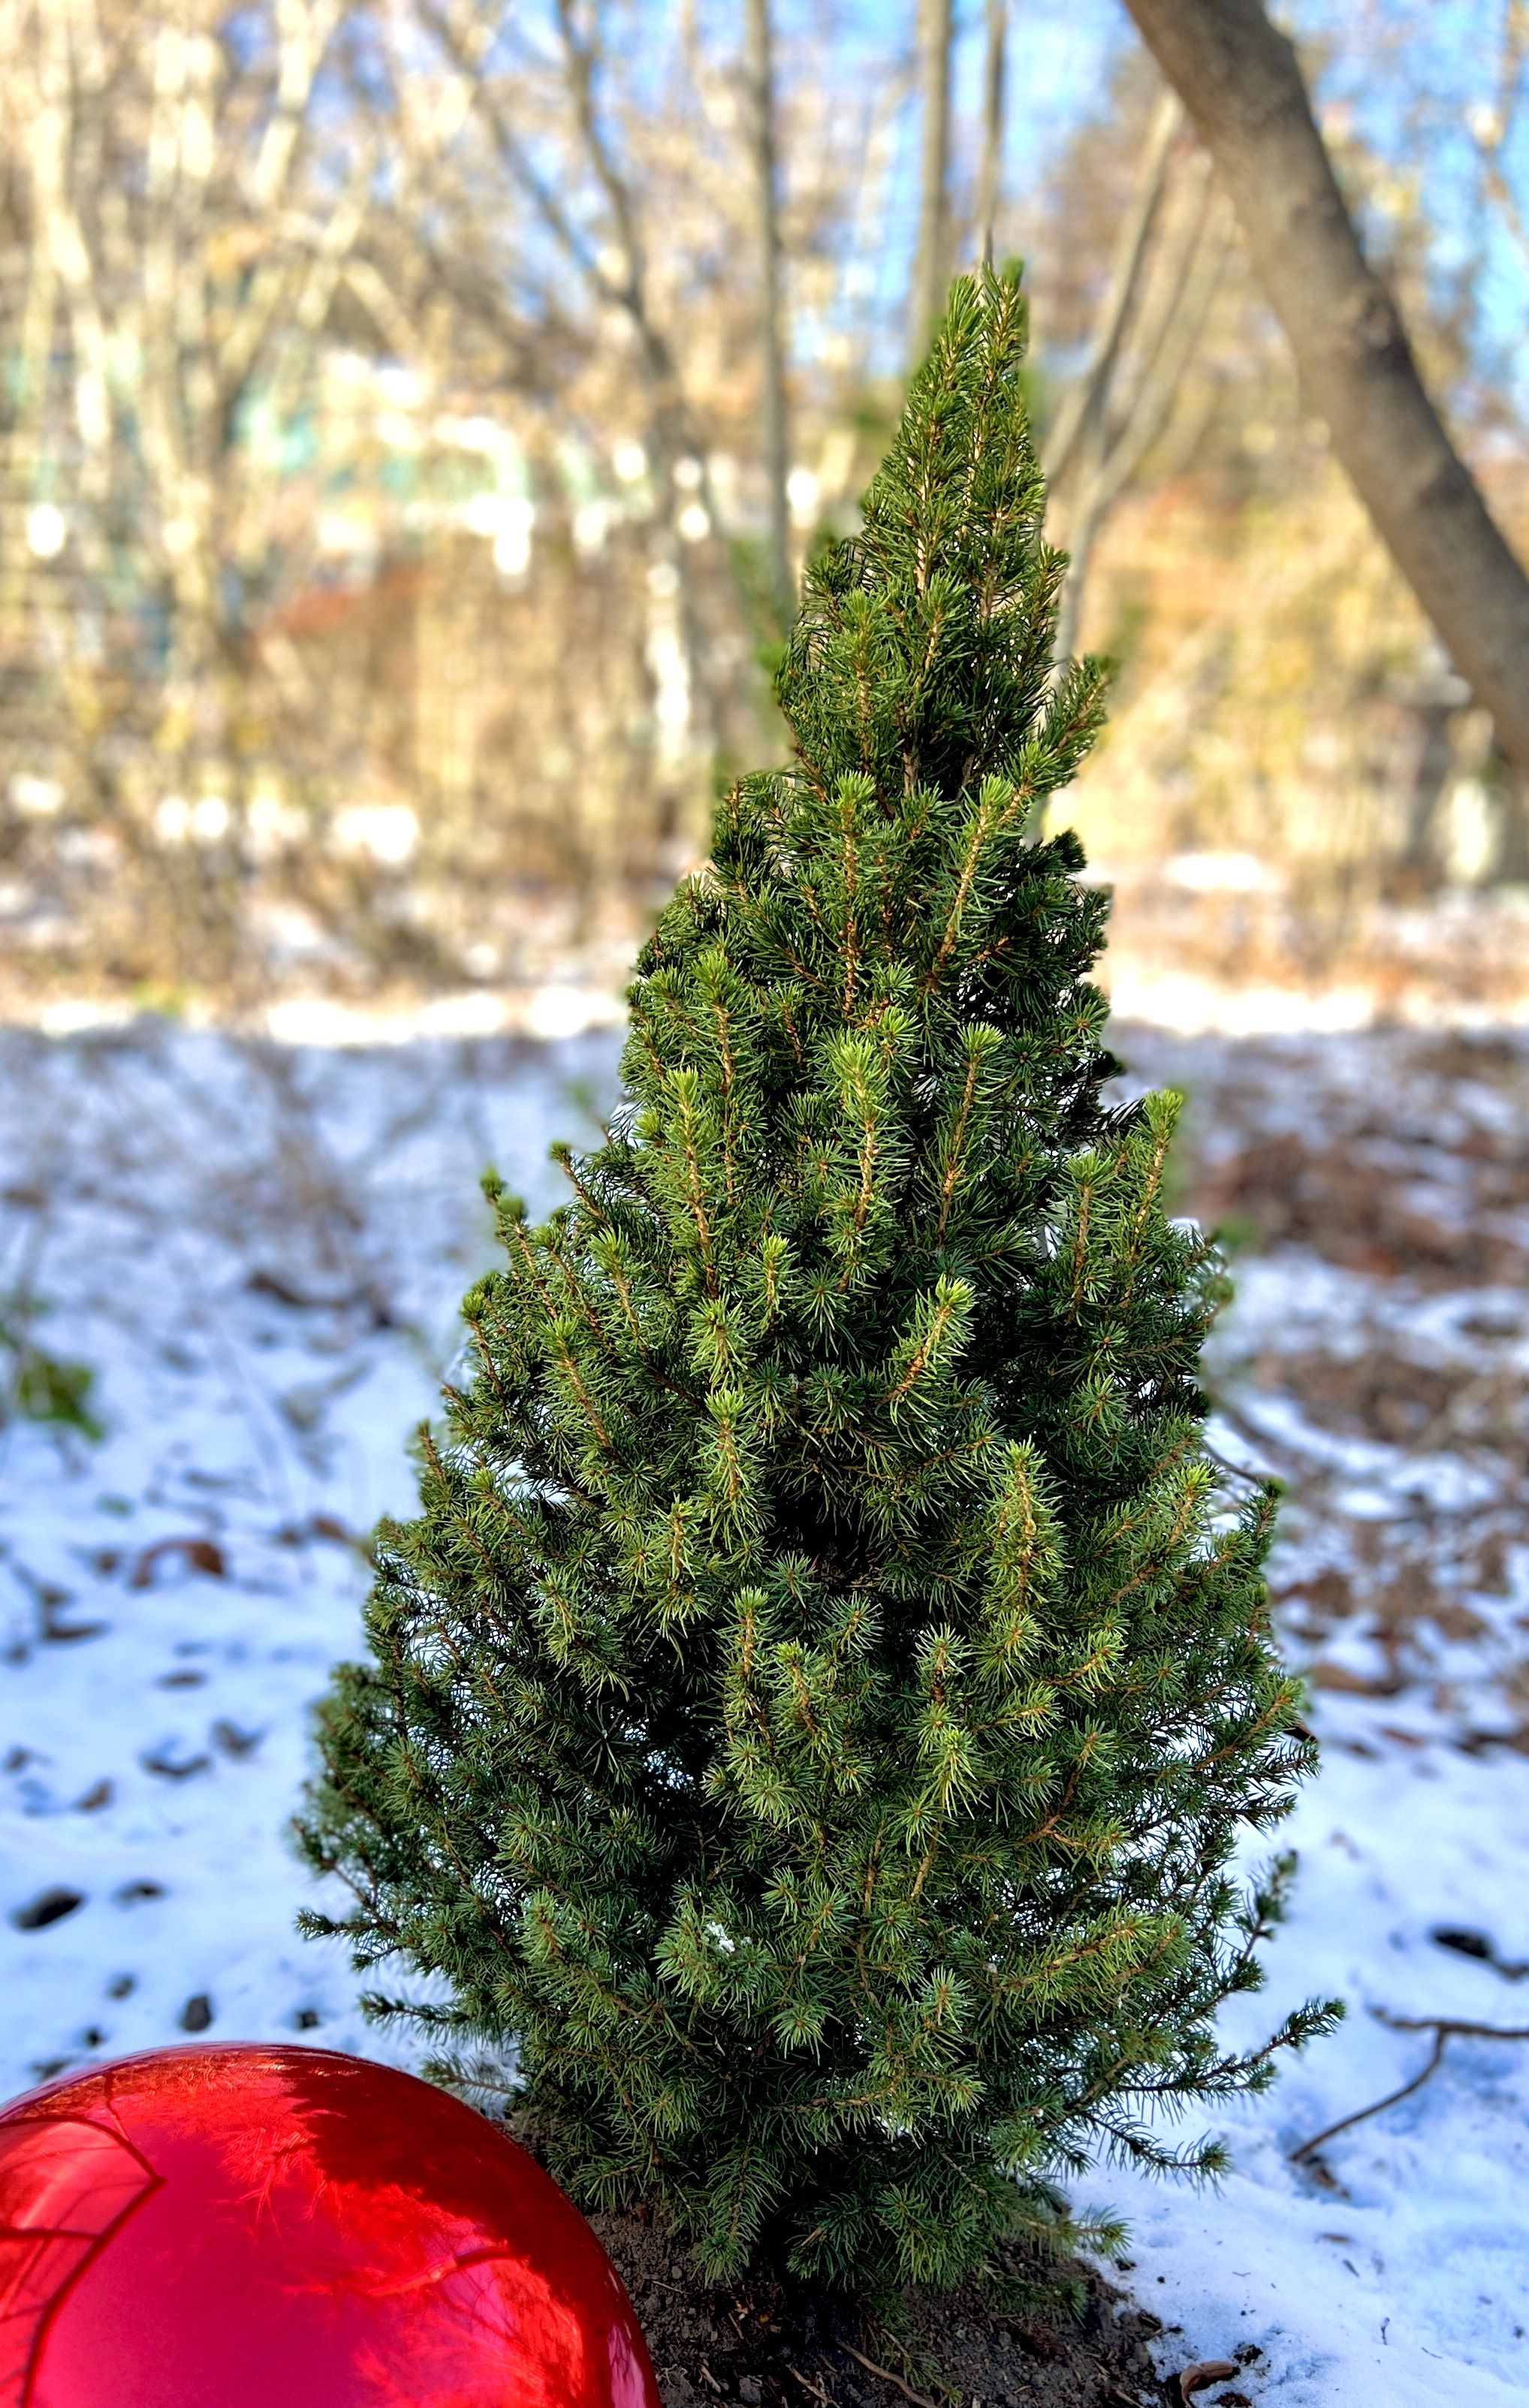 images/plants/picea/pic-spruce-it-up/pic-spruce-it-up-0016.jpg